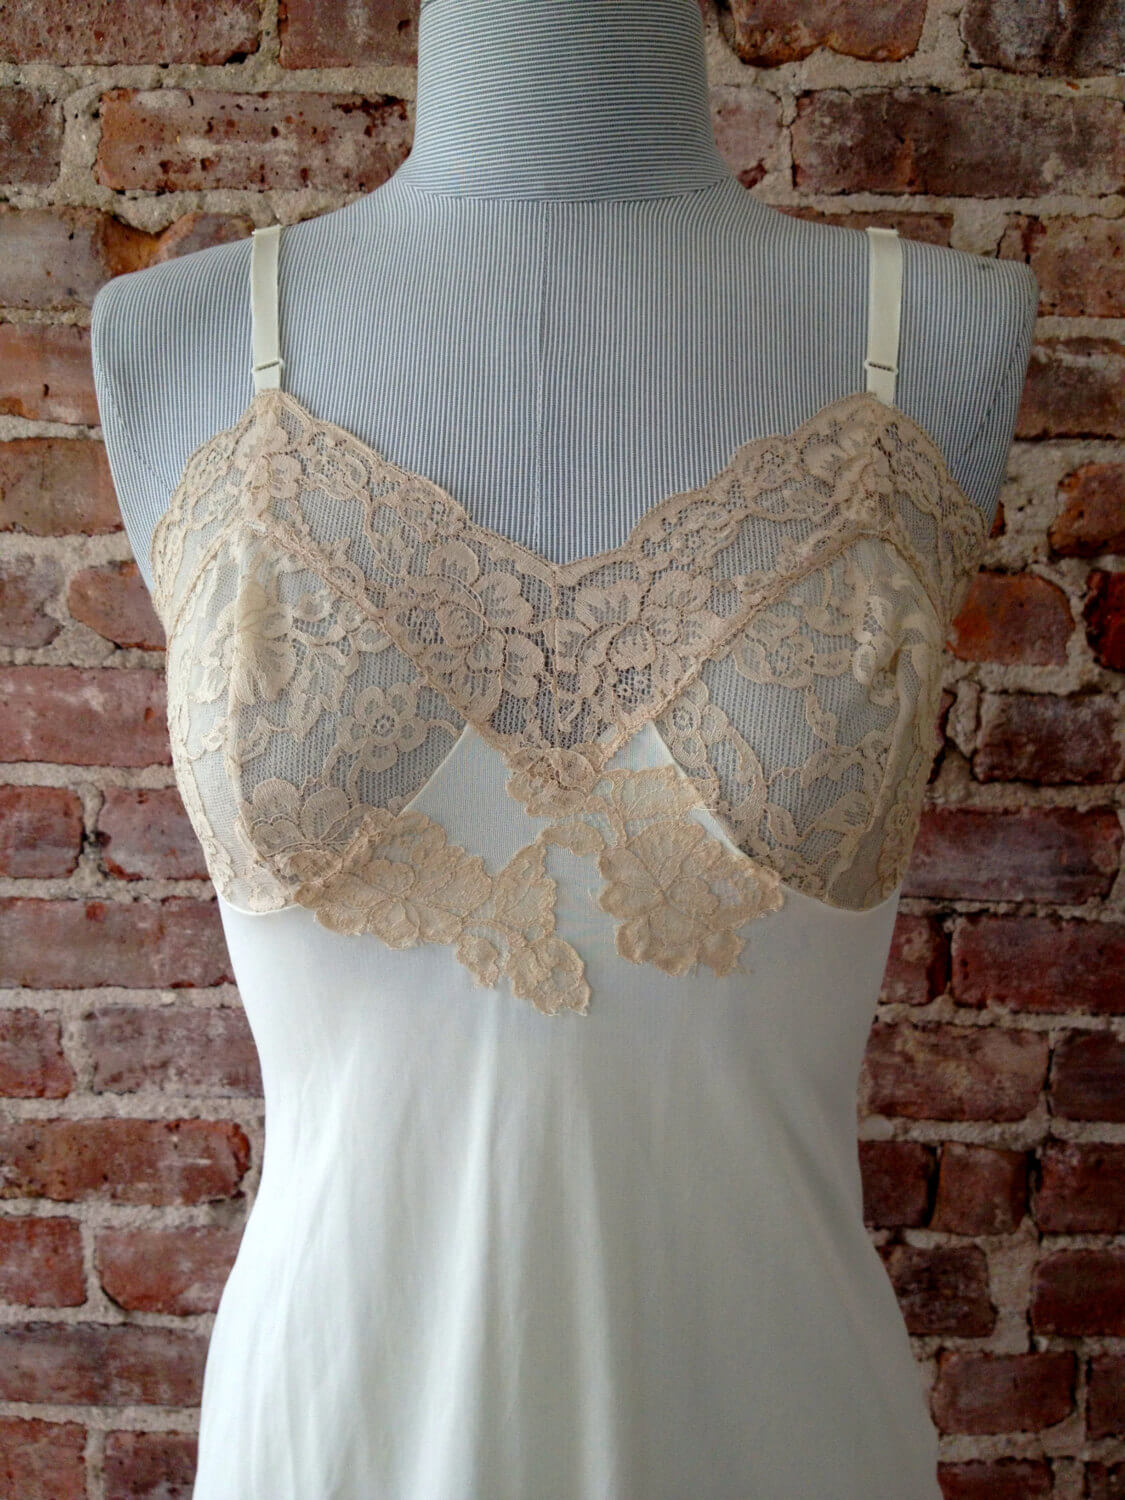 Beautiful Vintage Slips From Etsy The Lingerie Addict